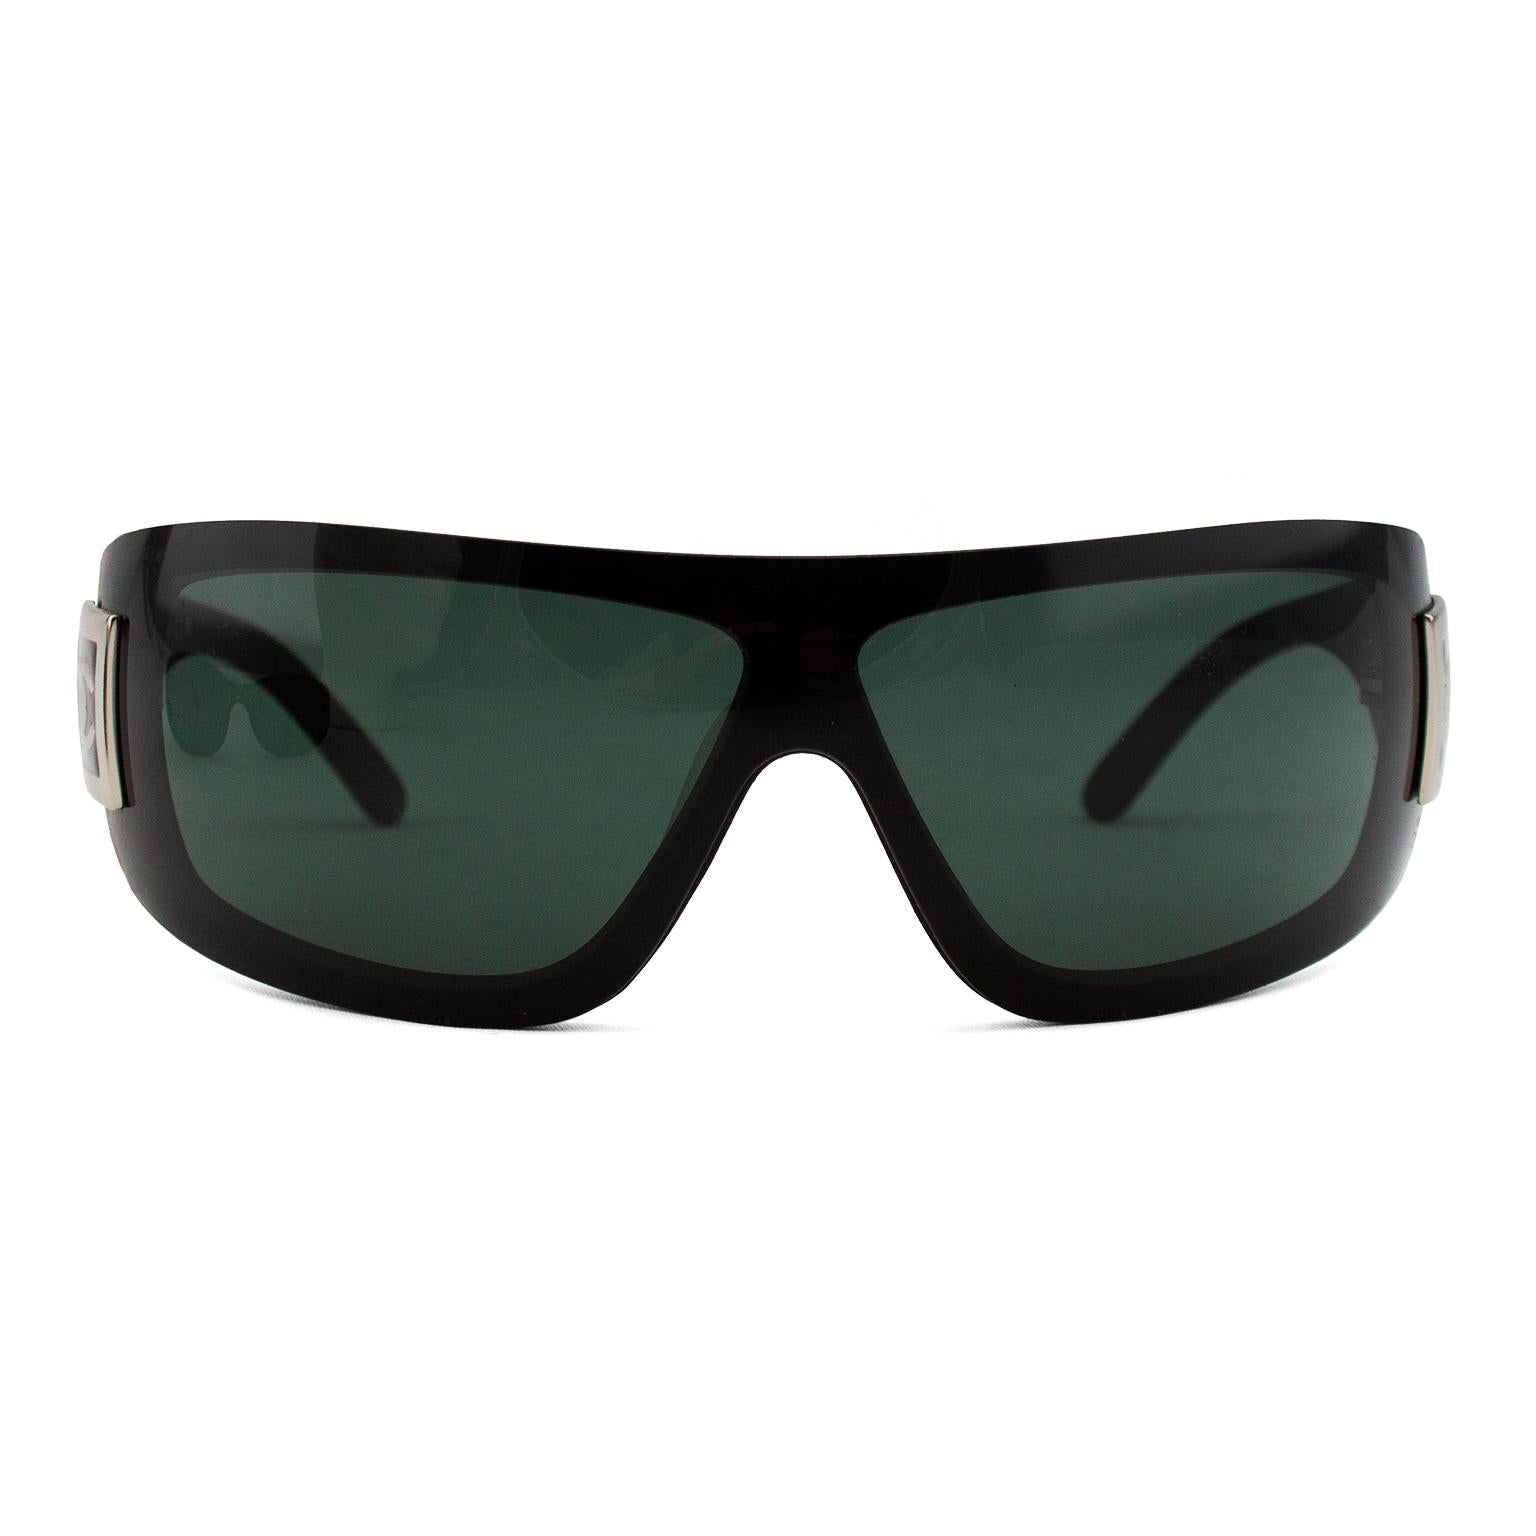 Chanel sunglasses from the early 2000's. Black resin wrap around style with contrasting silver CC logo in a silver square. Black/green lenses. Nose piece for comfort. Made in Italy. Sold without case. Style has been popularized by Sarah Jessica